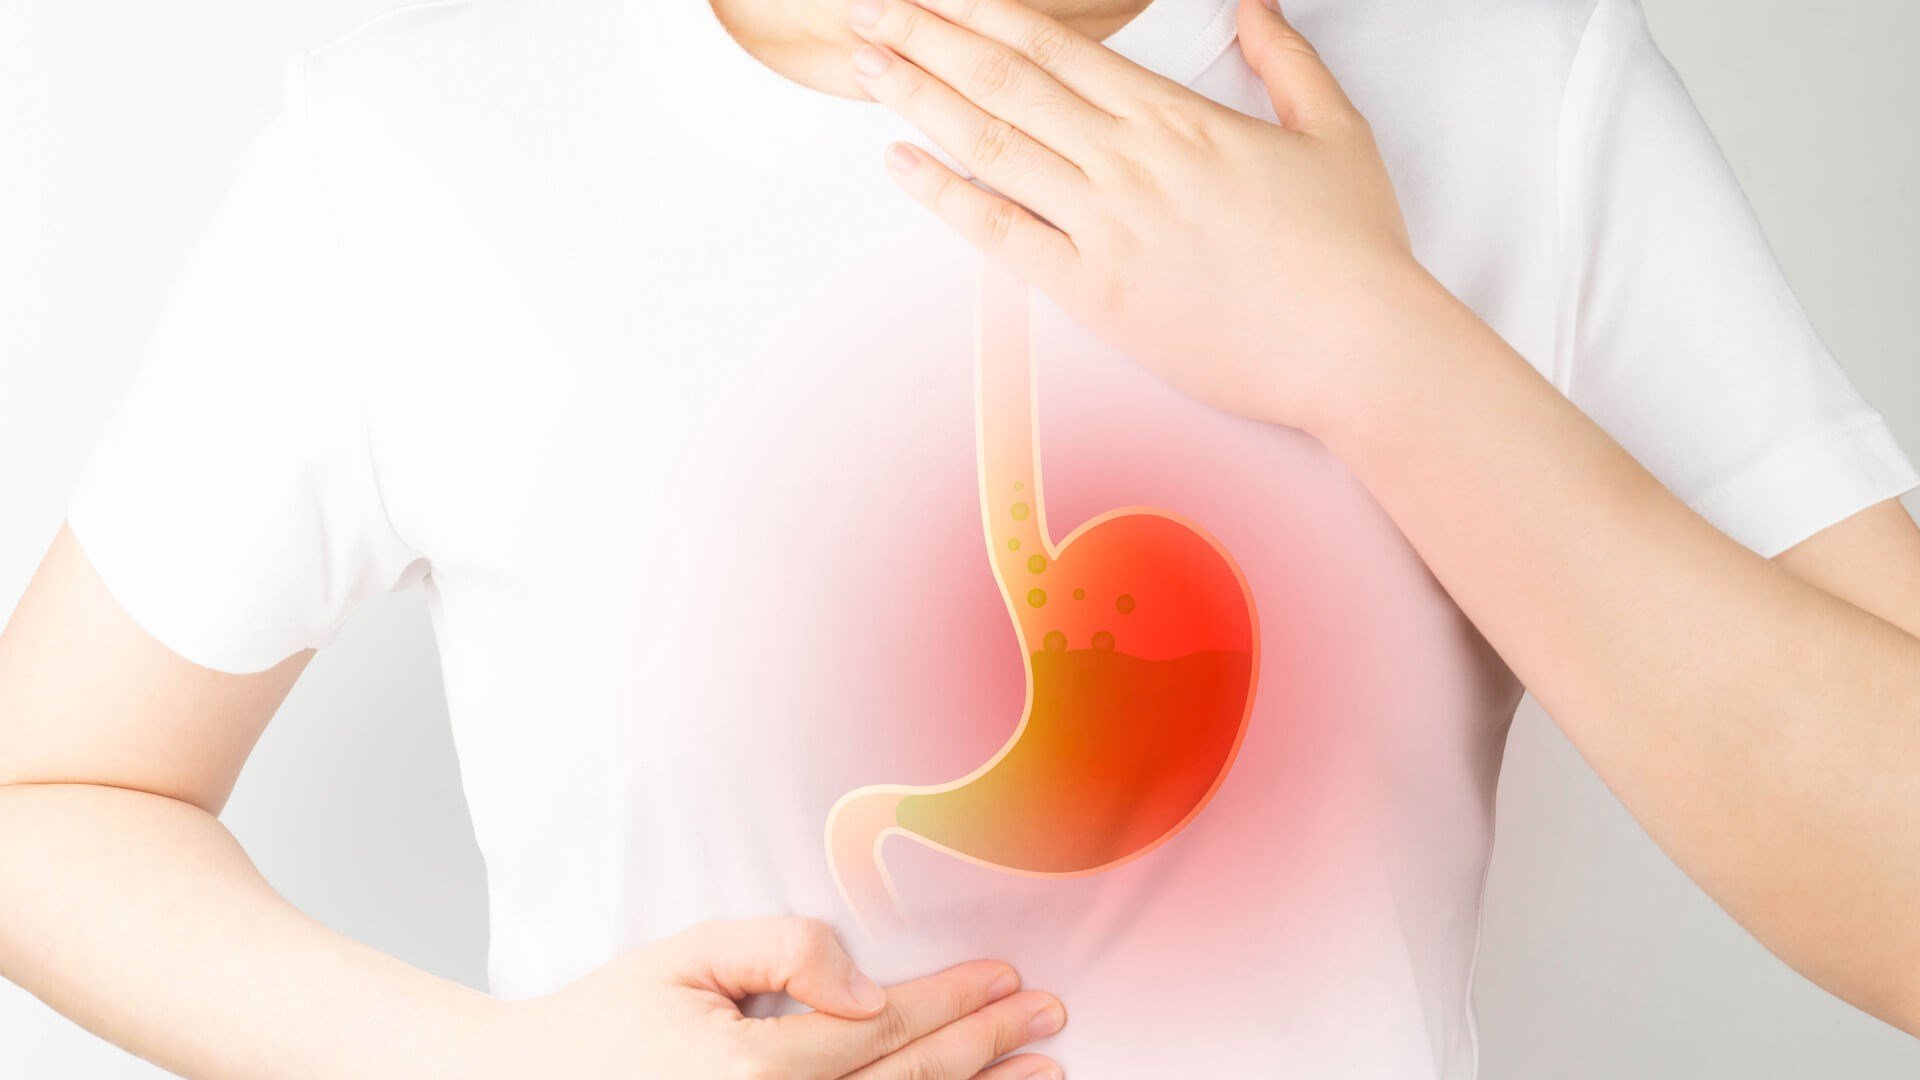 Excellent Advice About Acid Reflux That You Will Want To Read